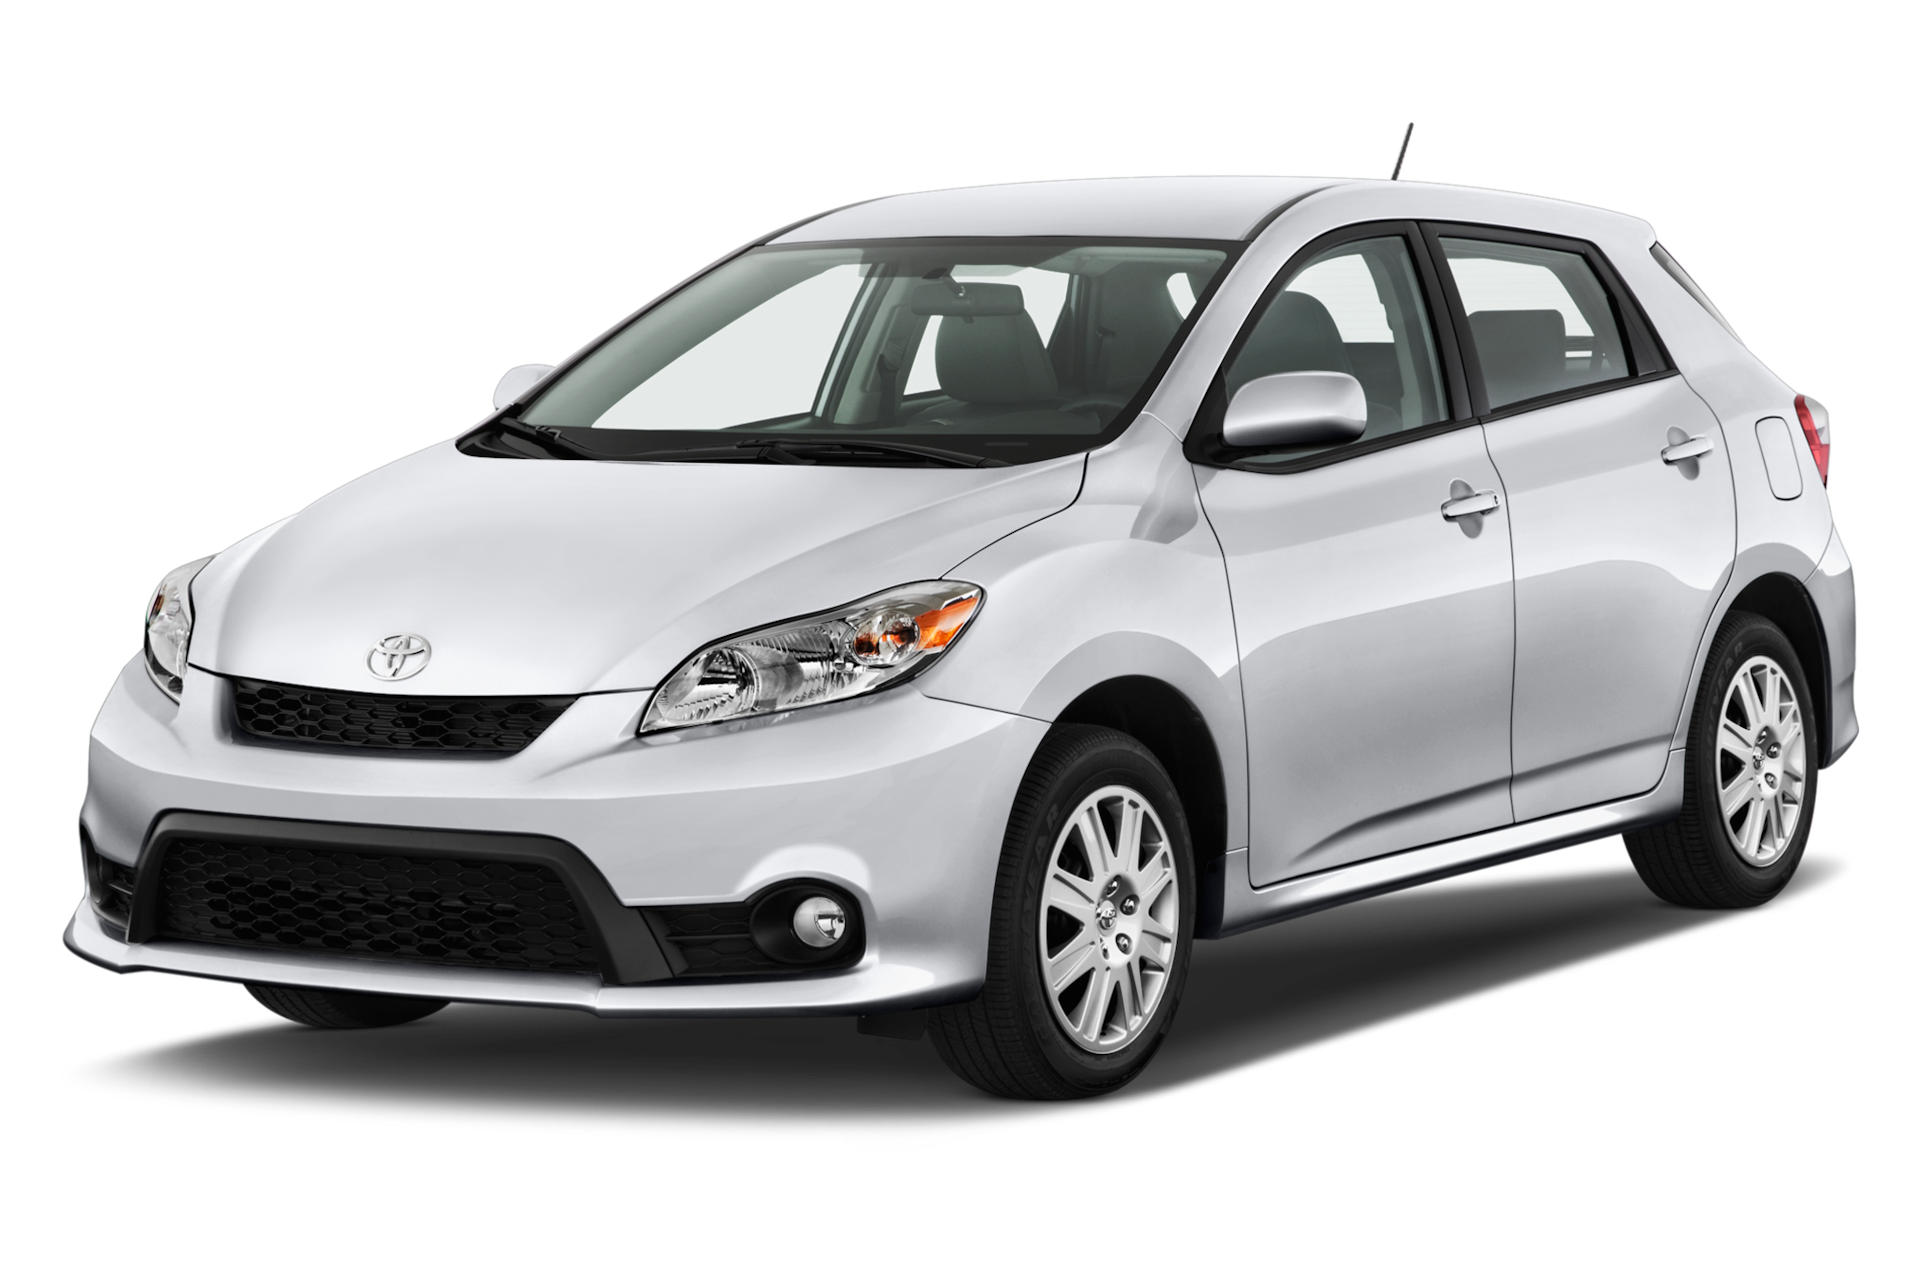 2013 Toyota Matrix Prices, Reviews, and Photos - MotorTrend